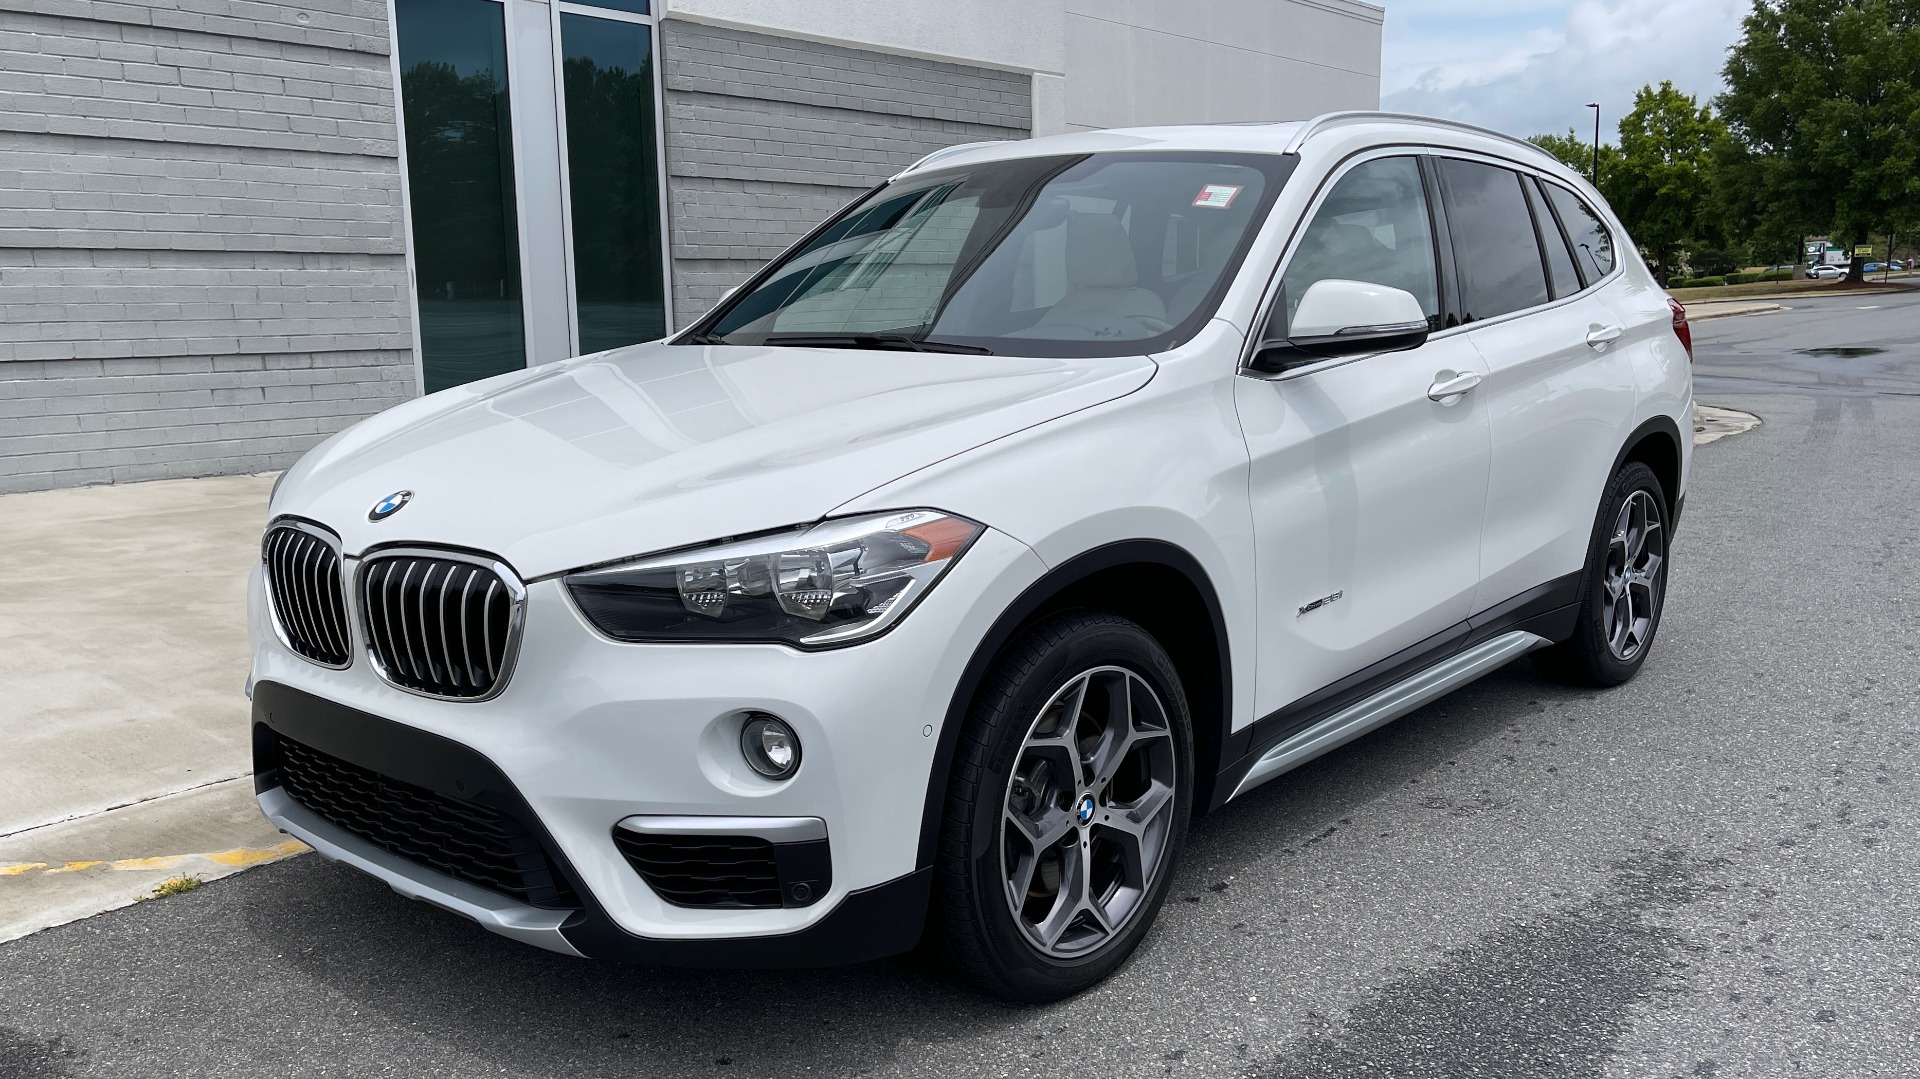 Used 2018 BMW X1 XDRIVE28I / CONV PKG / PANO-ROOF / HTD STS / PARK ASST / REARVIEW for sale Sold at Formula Imports in Charlotte NC 28227 3